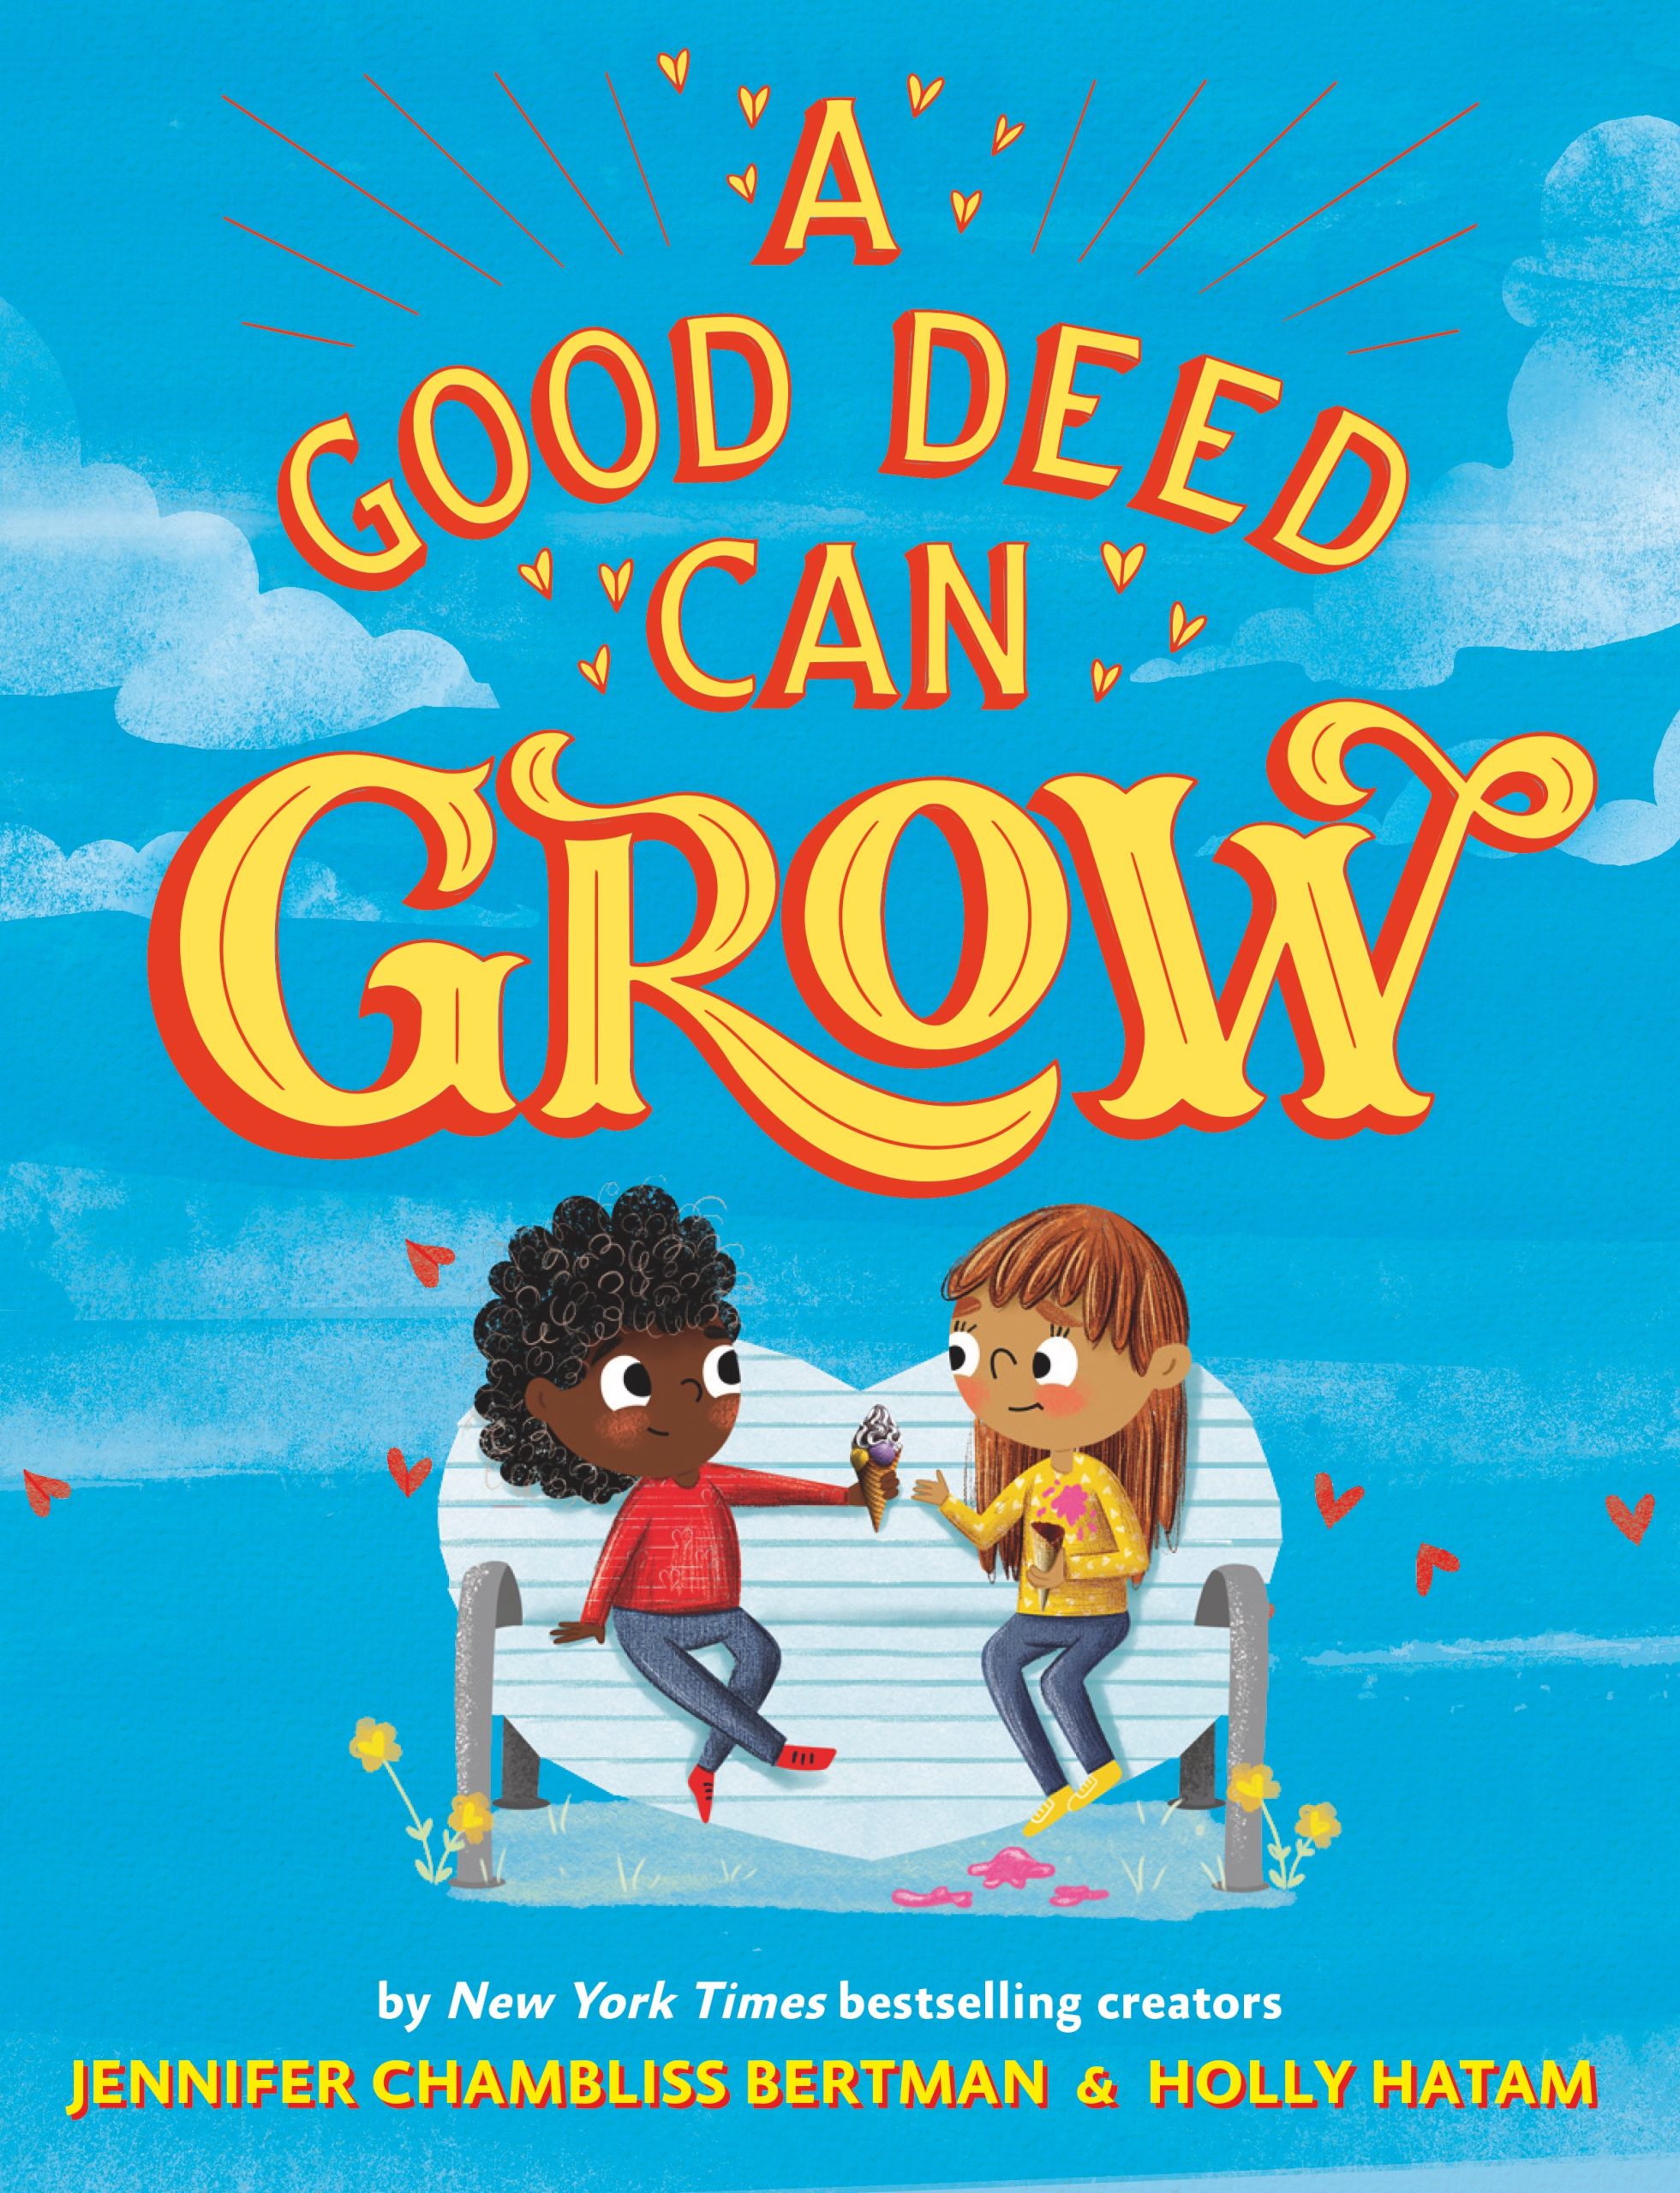 Chatting With Author Jennifer Chambliss Bertman & Illustrator Holly Hatam (A Good Deed Can Grow), Plus Giveaway! ~ US Only!